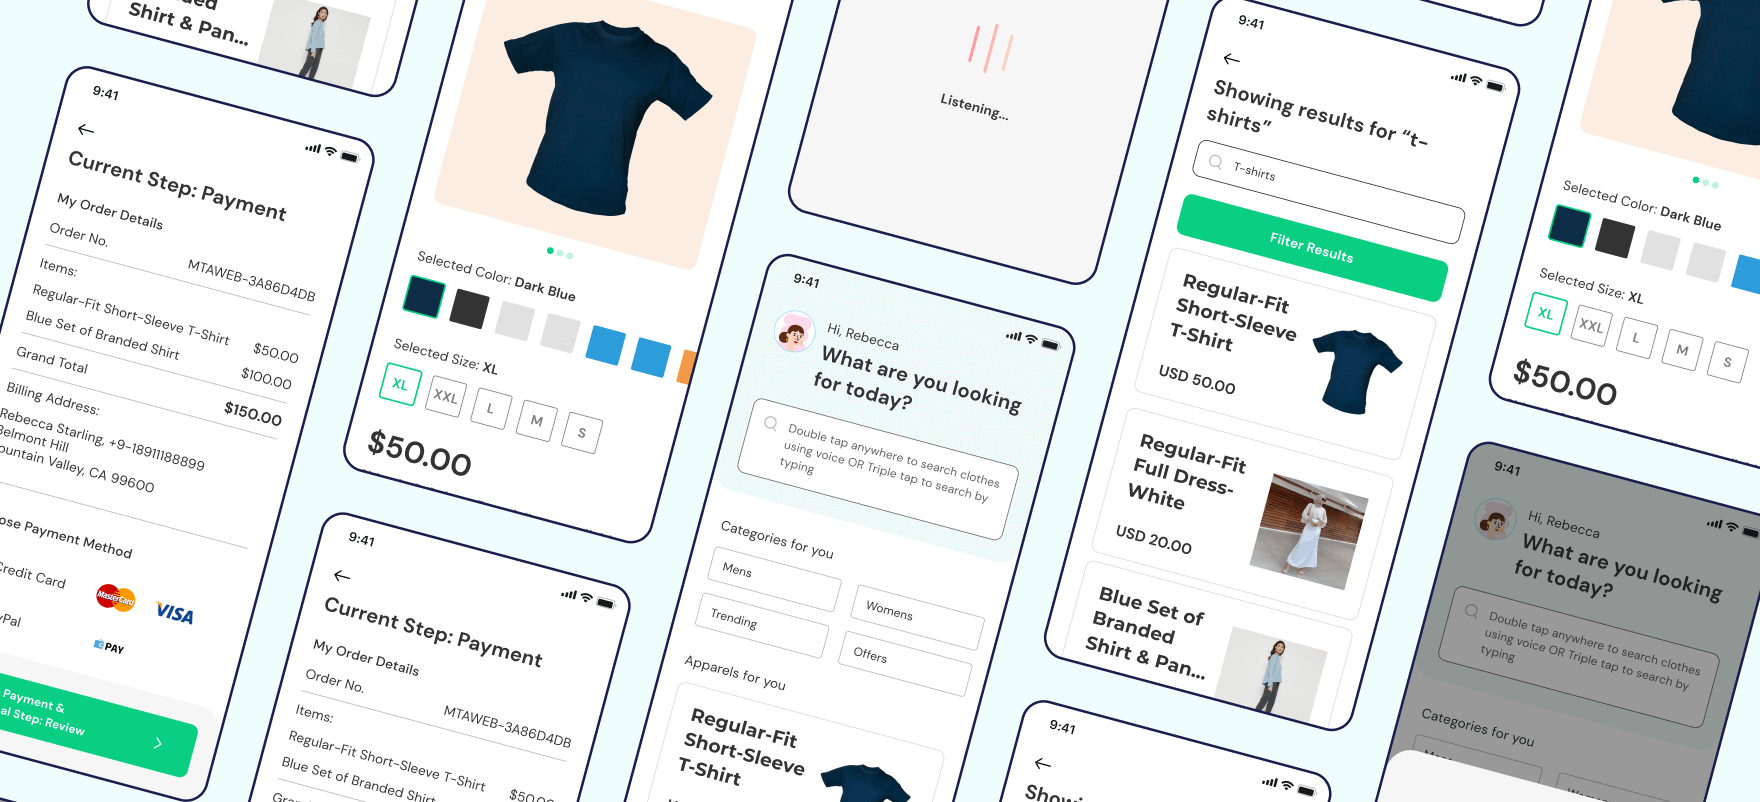 Neue: An Online Clothing Store for Blind People [Case Study]